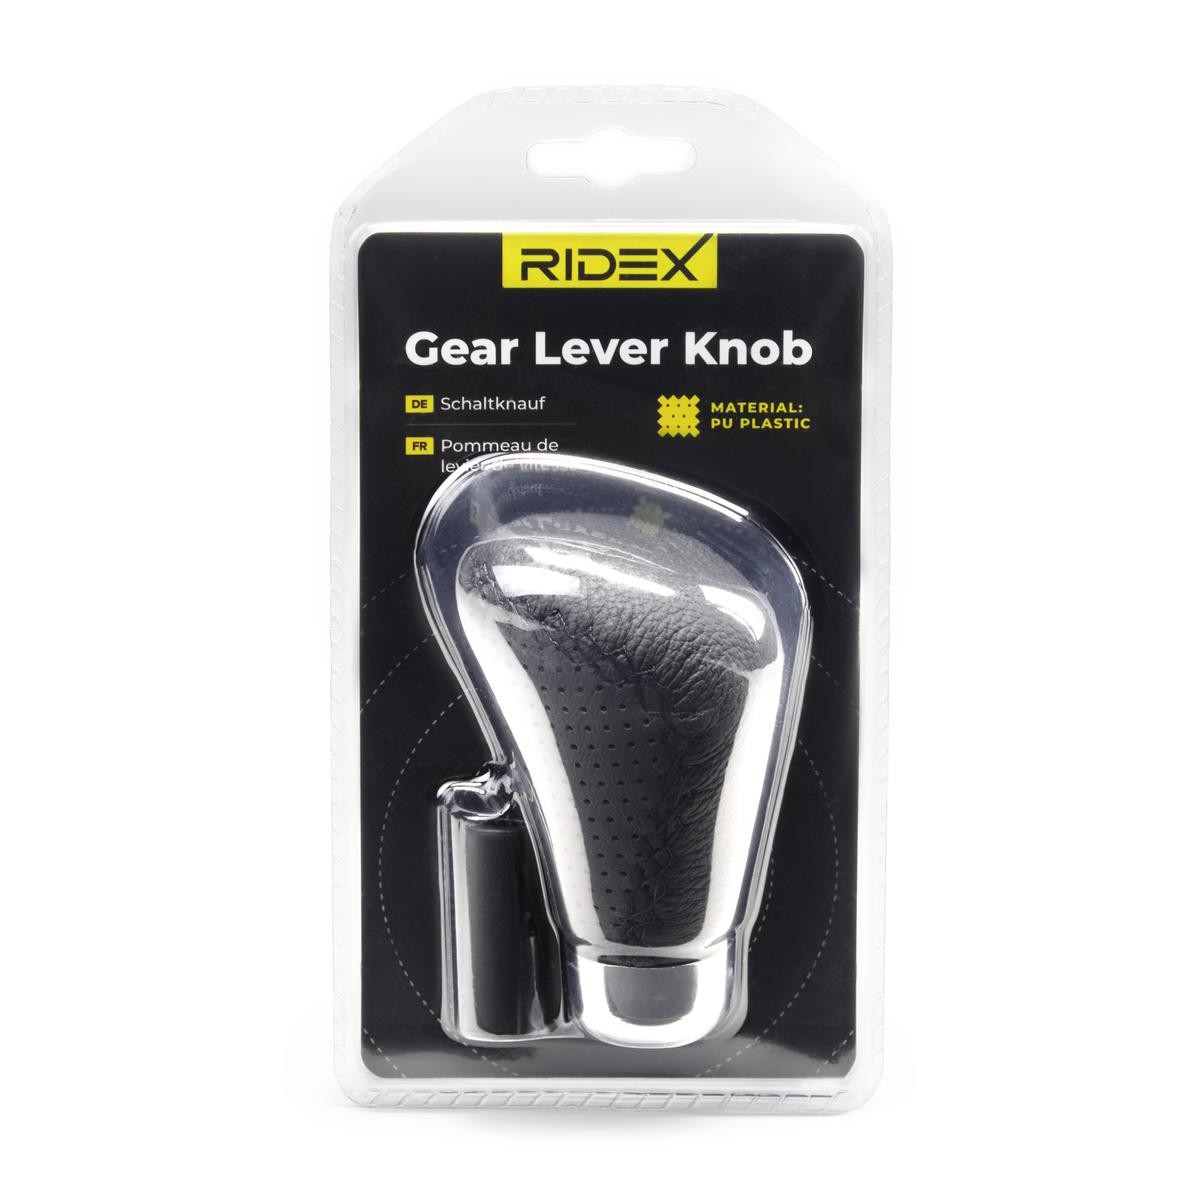 Universal gear knob for your car